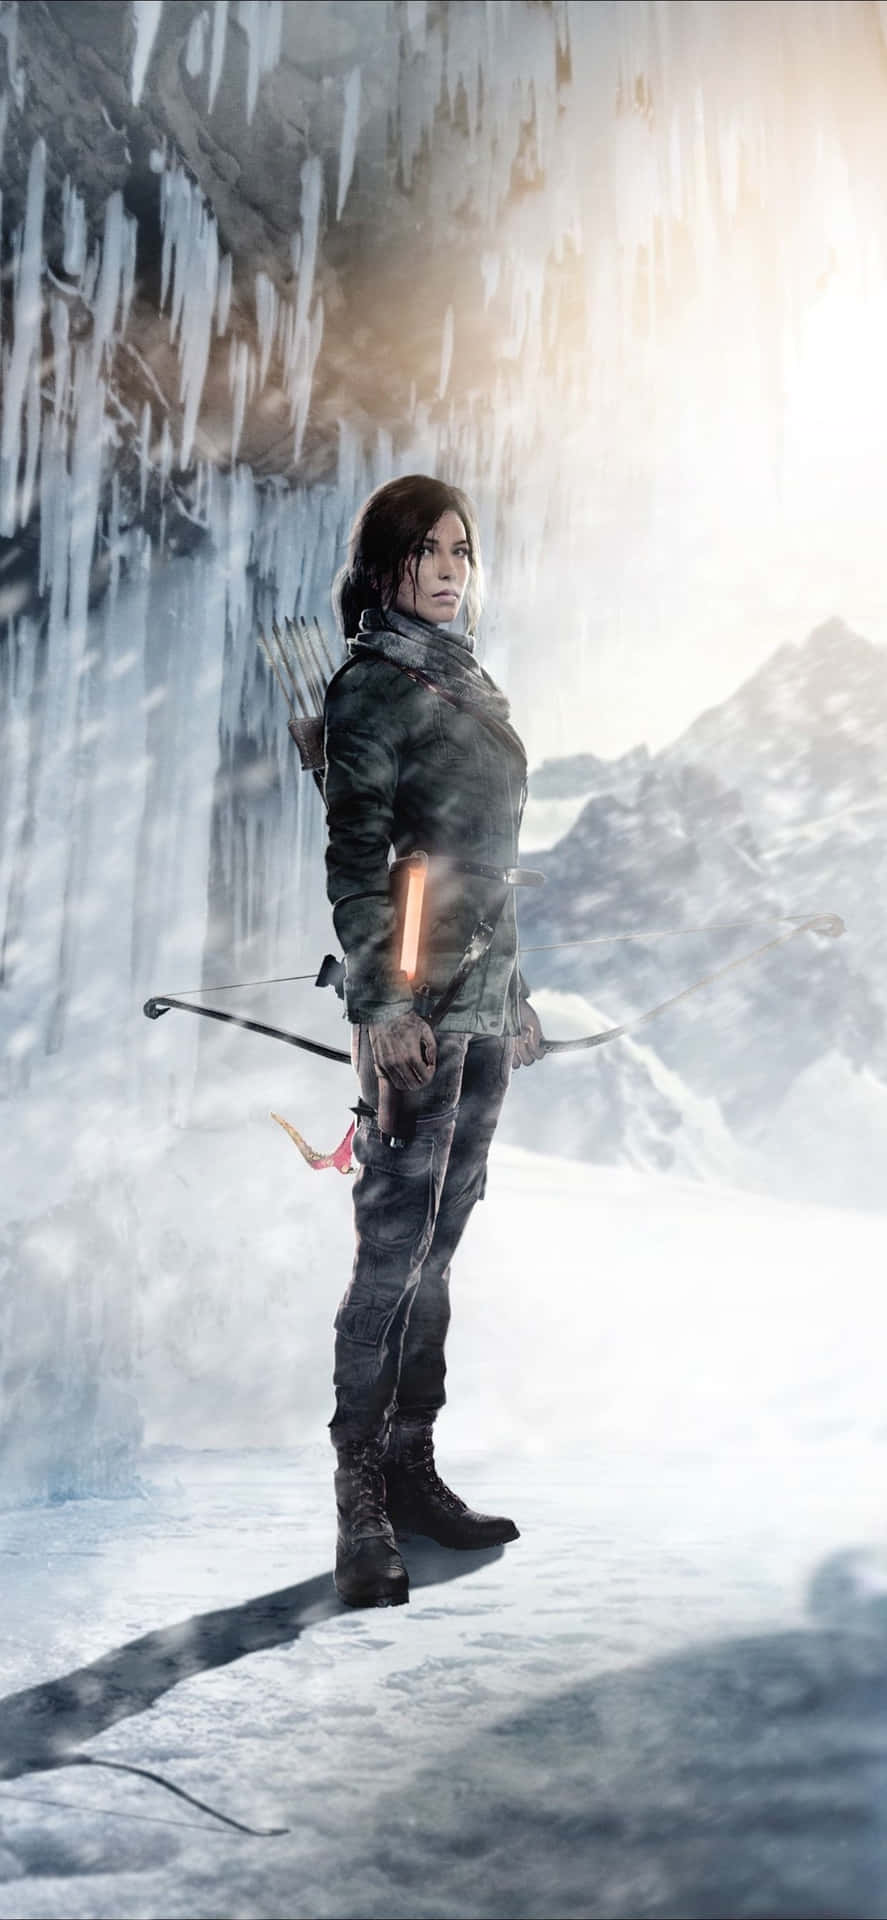 “Uncover secrets and adventure on your iPhone Xs Max with Rise of the Tomb Raider"